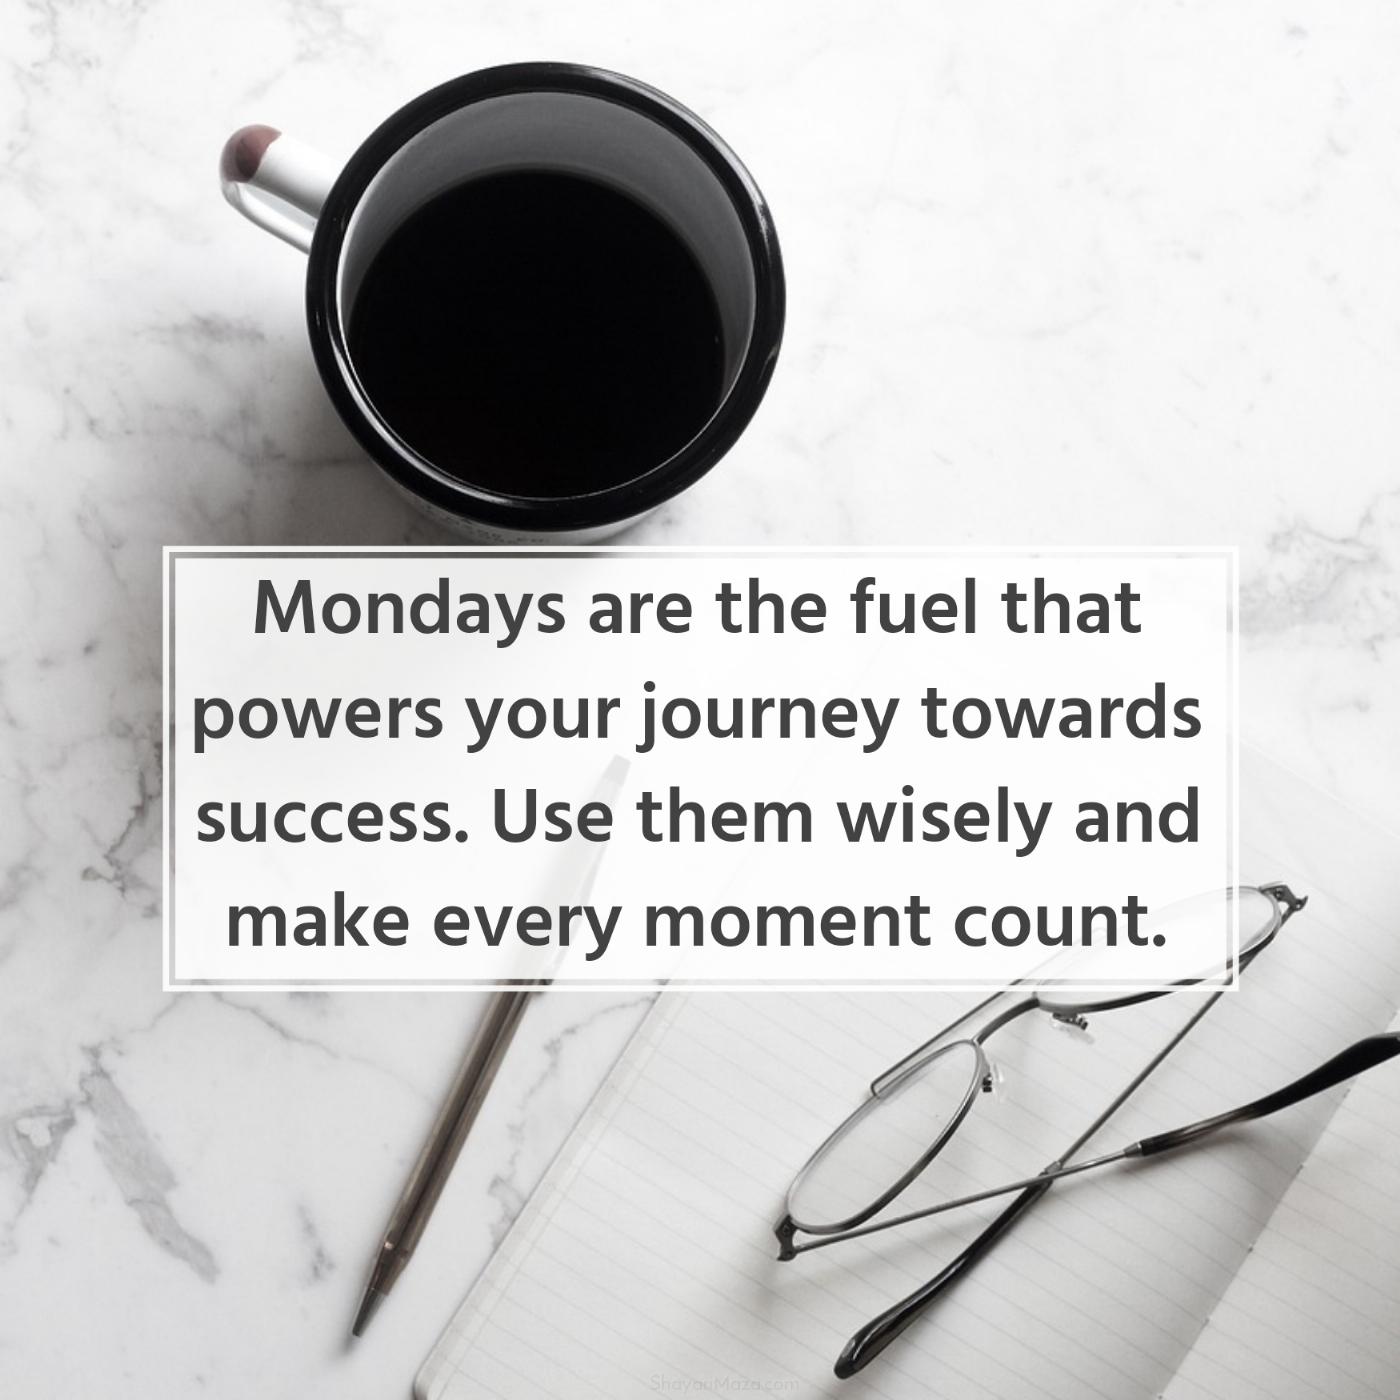 Mondays are the fuel that powers your journey